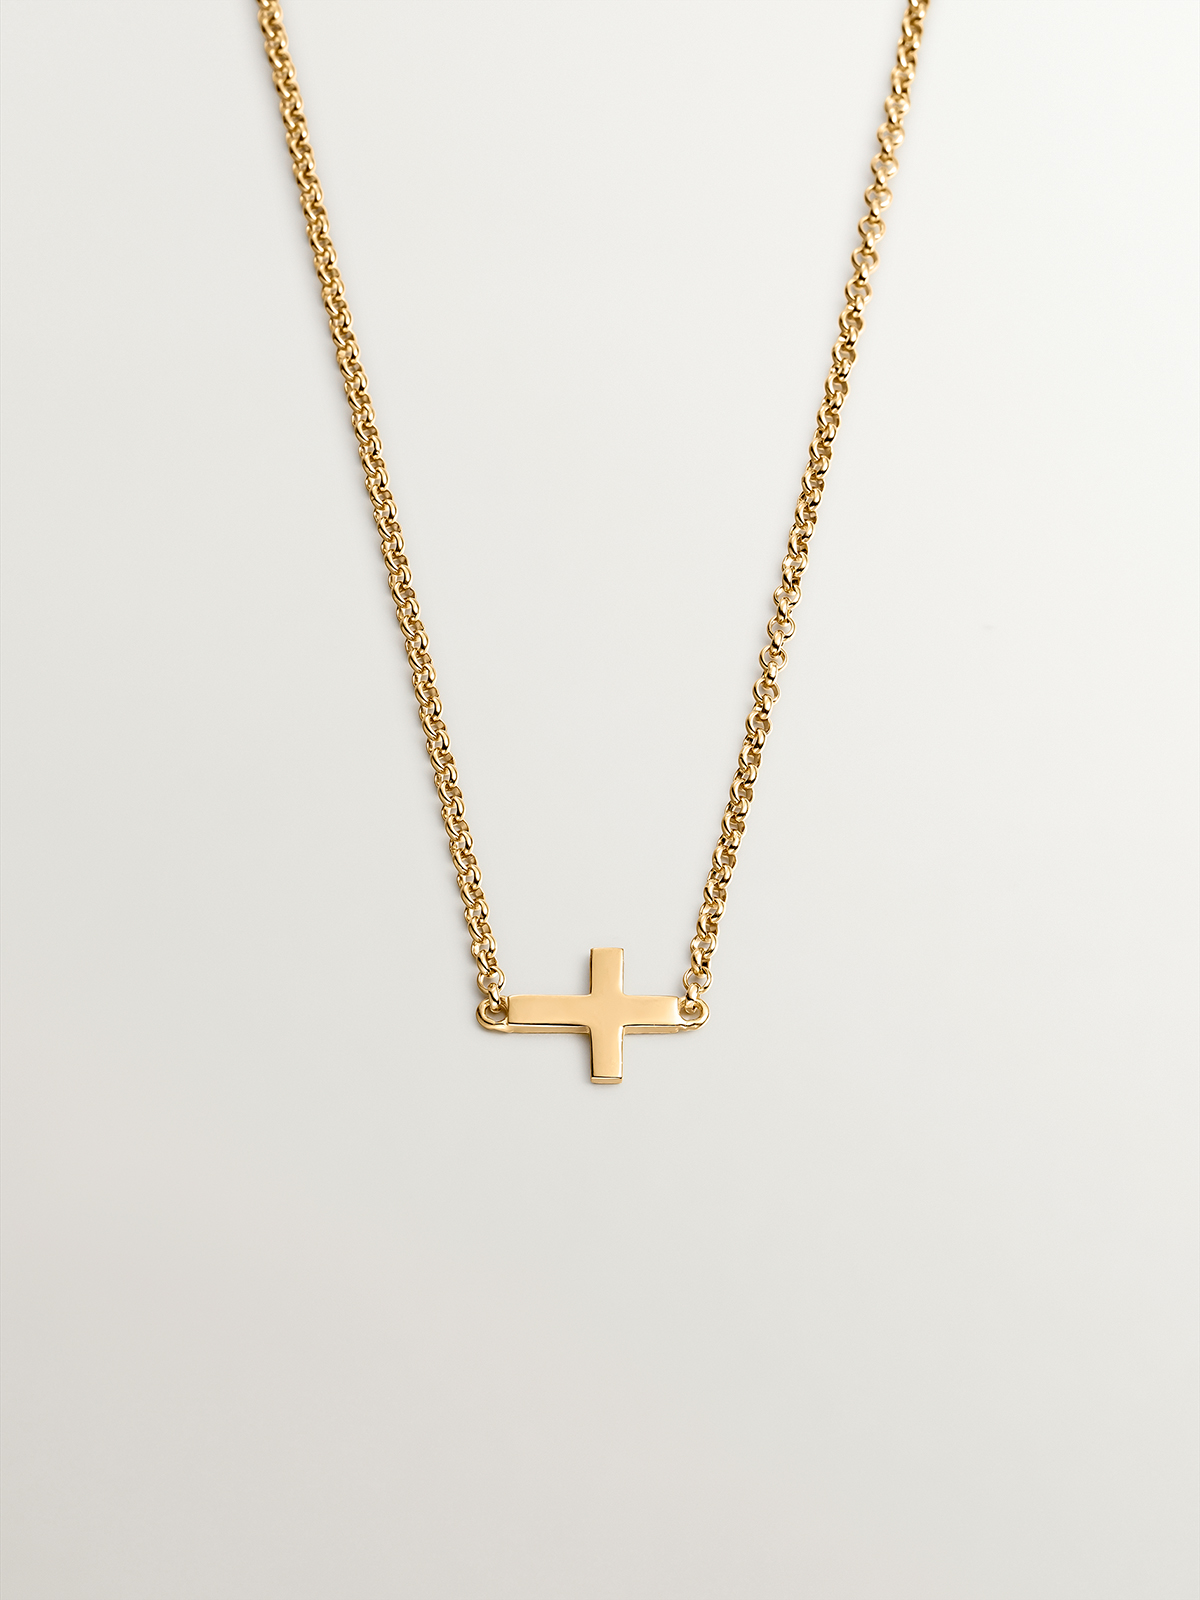 925 Silver pendant bathed in 18K yellow gold with a cross